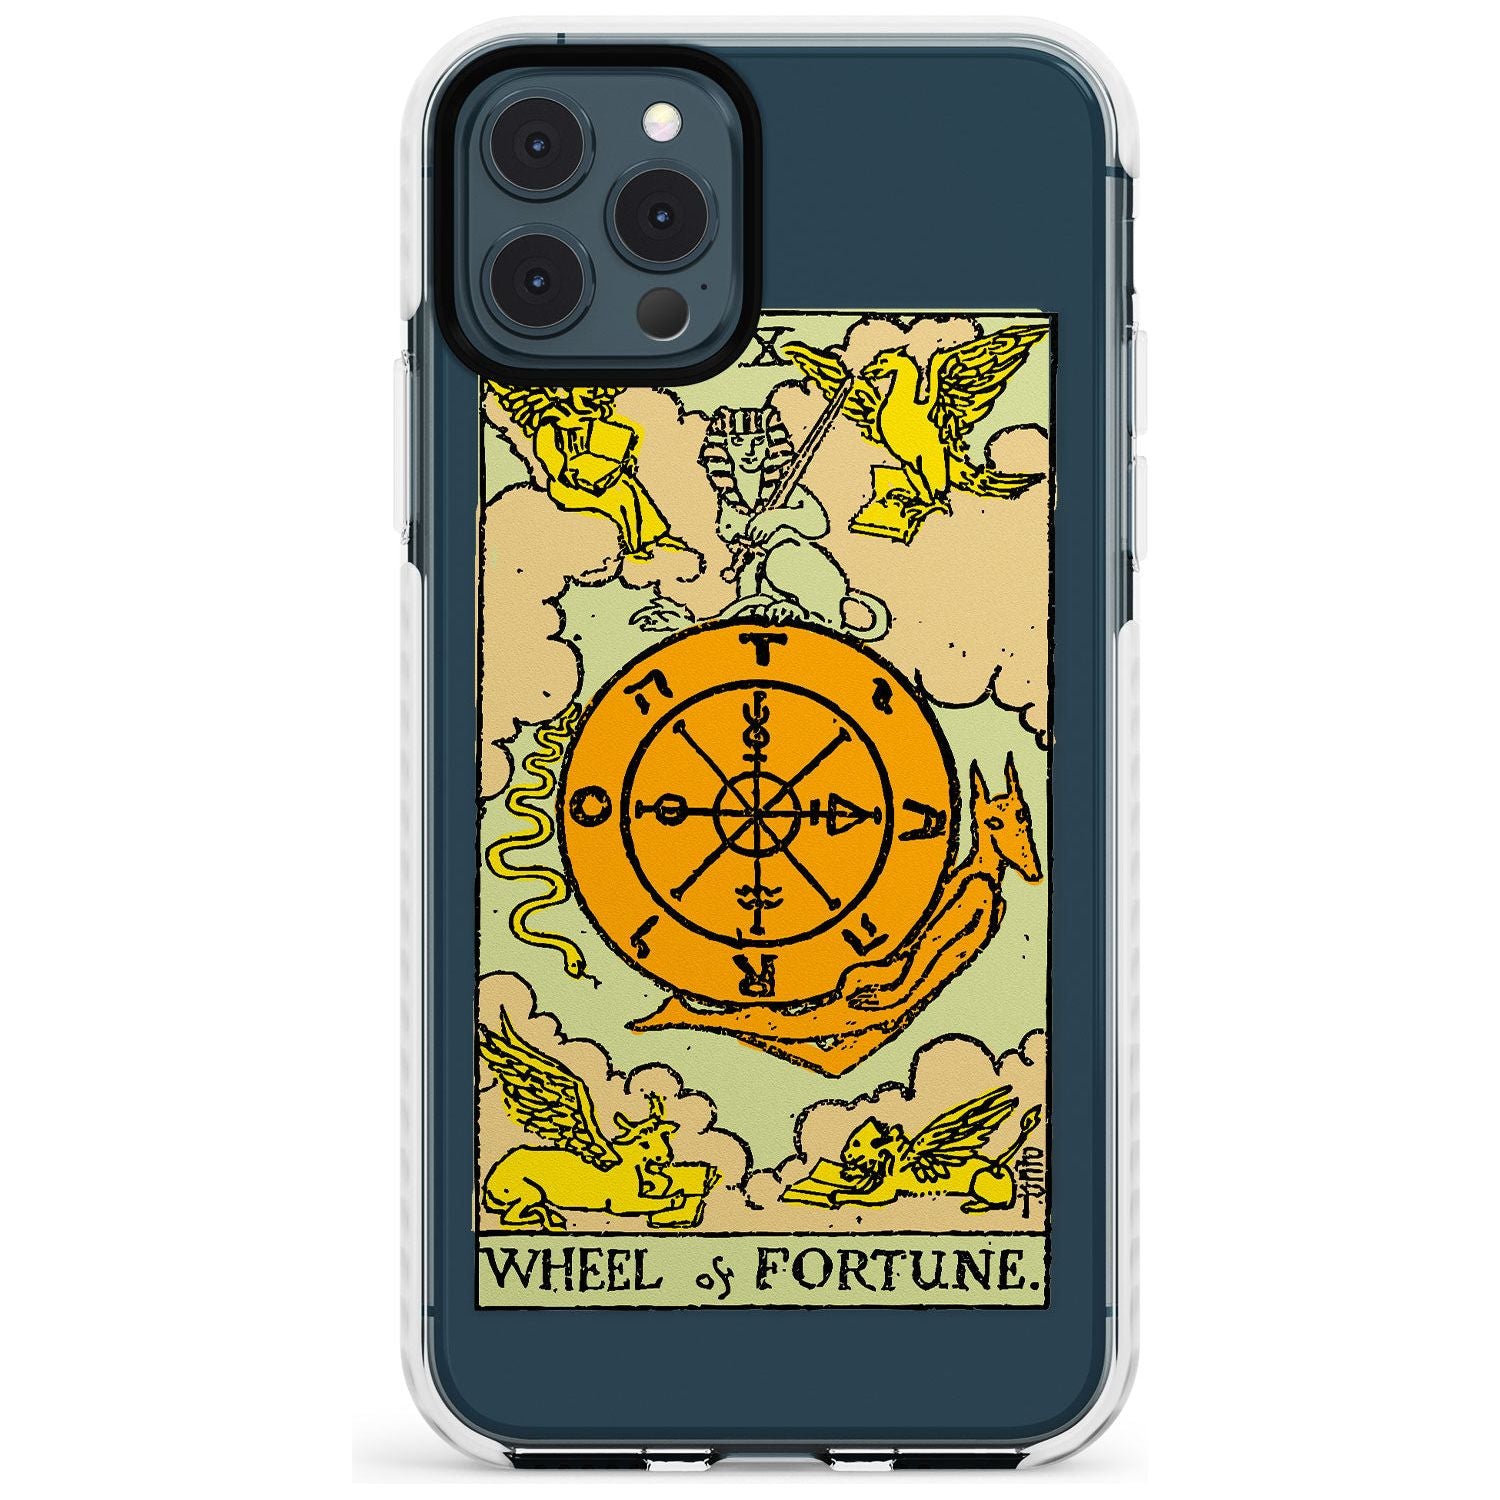 Wheel of Fortune Tarot Card - Colour Slim TPU Phone Case for iPhone 11 Pro Max